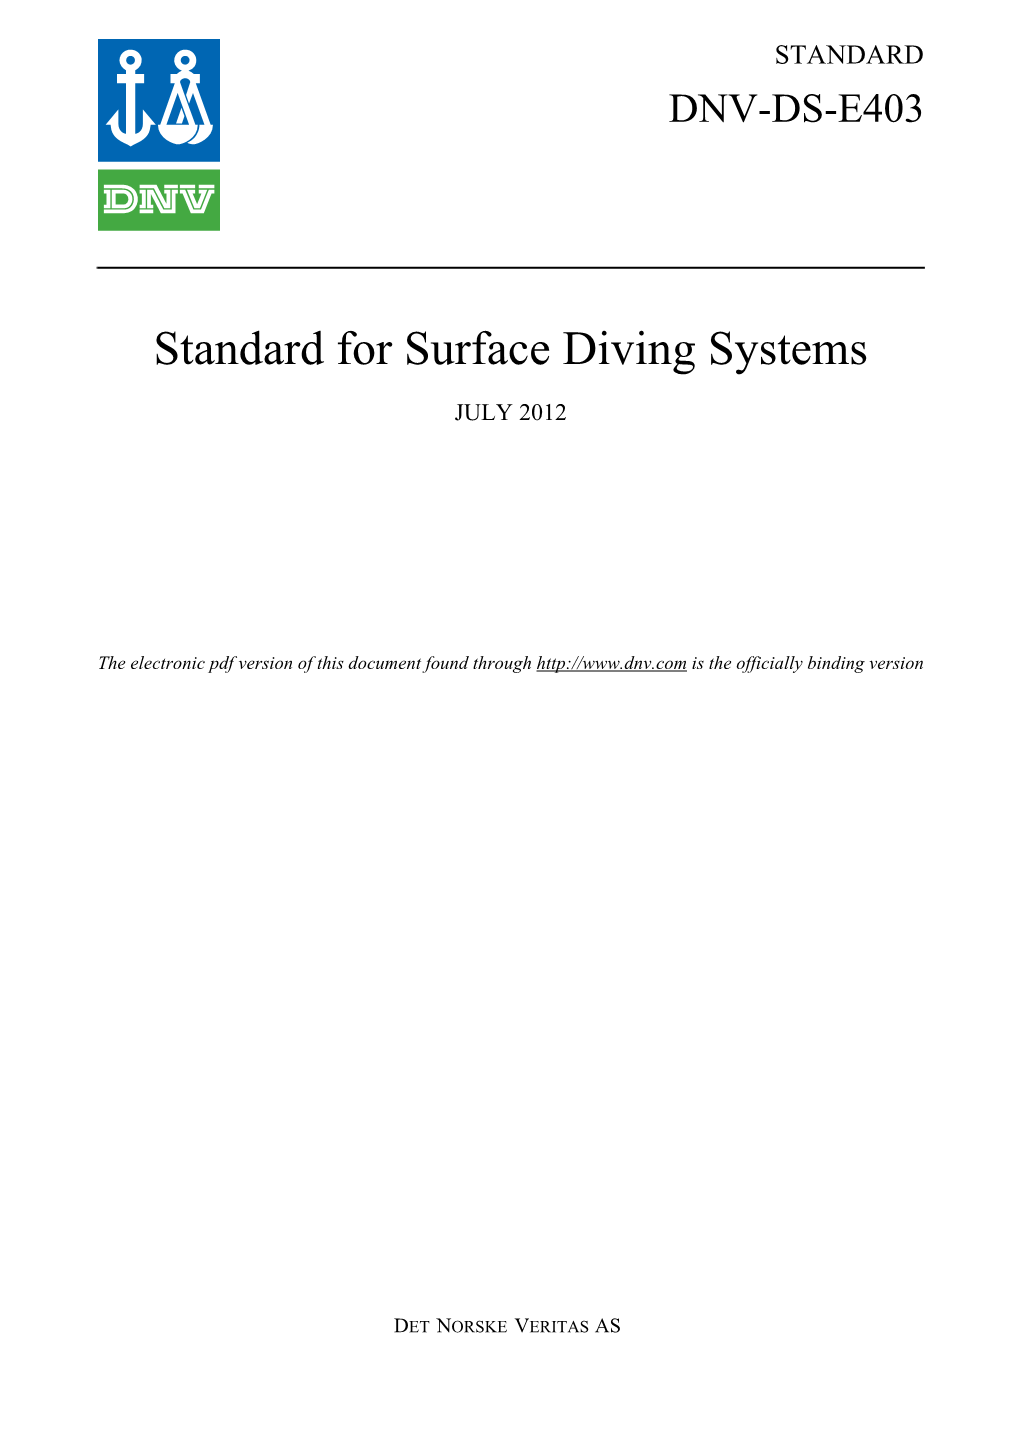 DNV-DS-E403: Standard for Surface Diving Systems